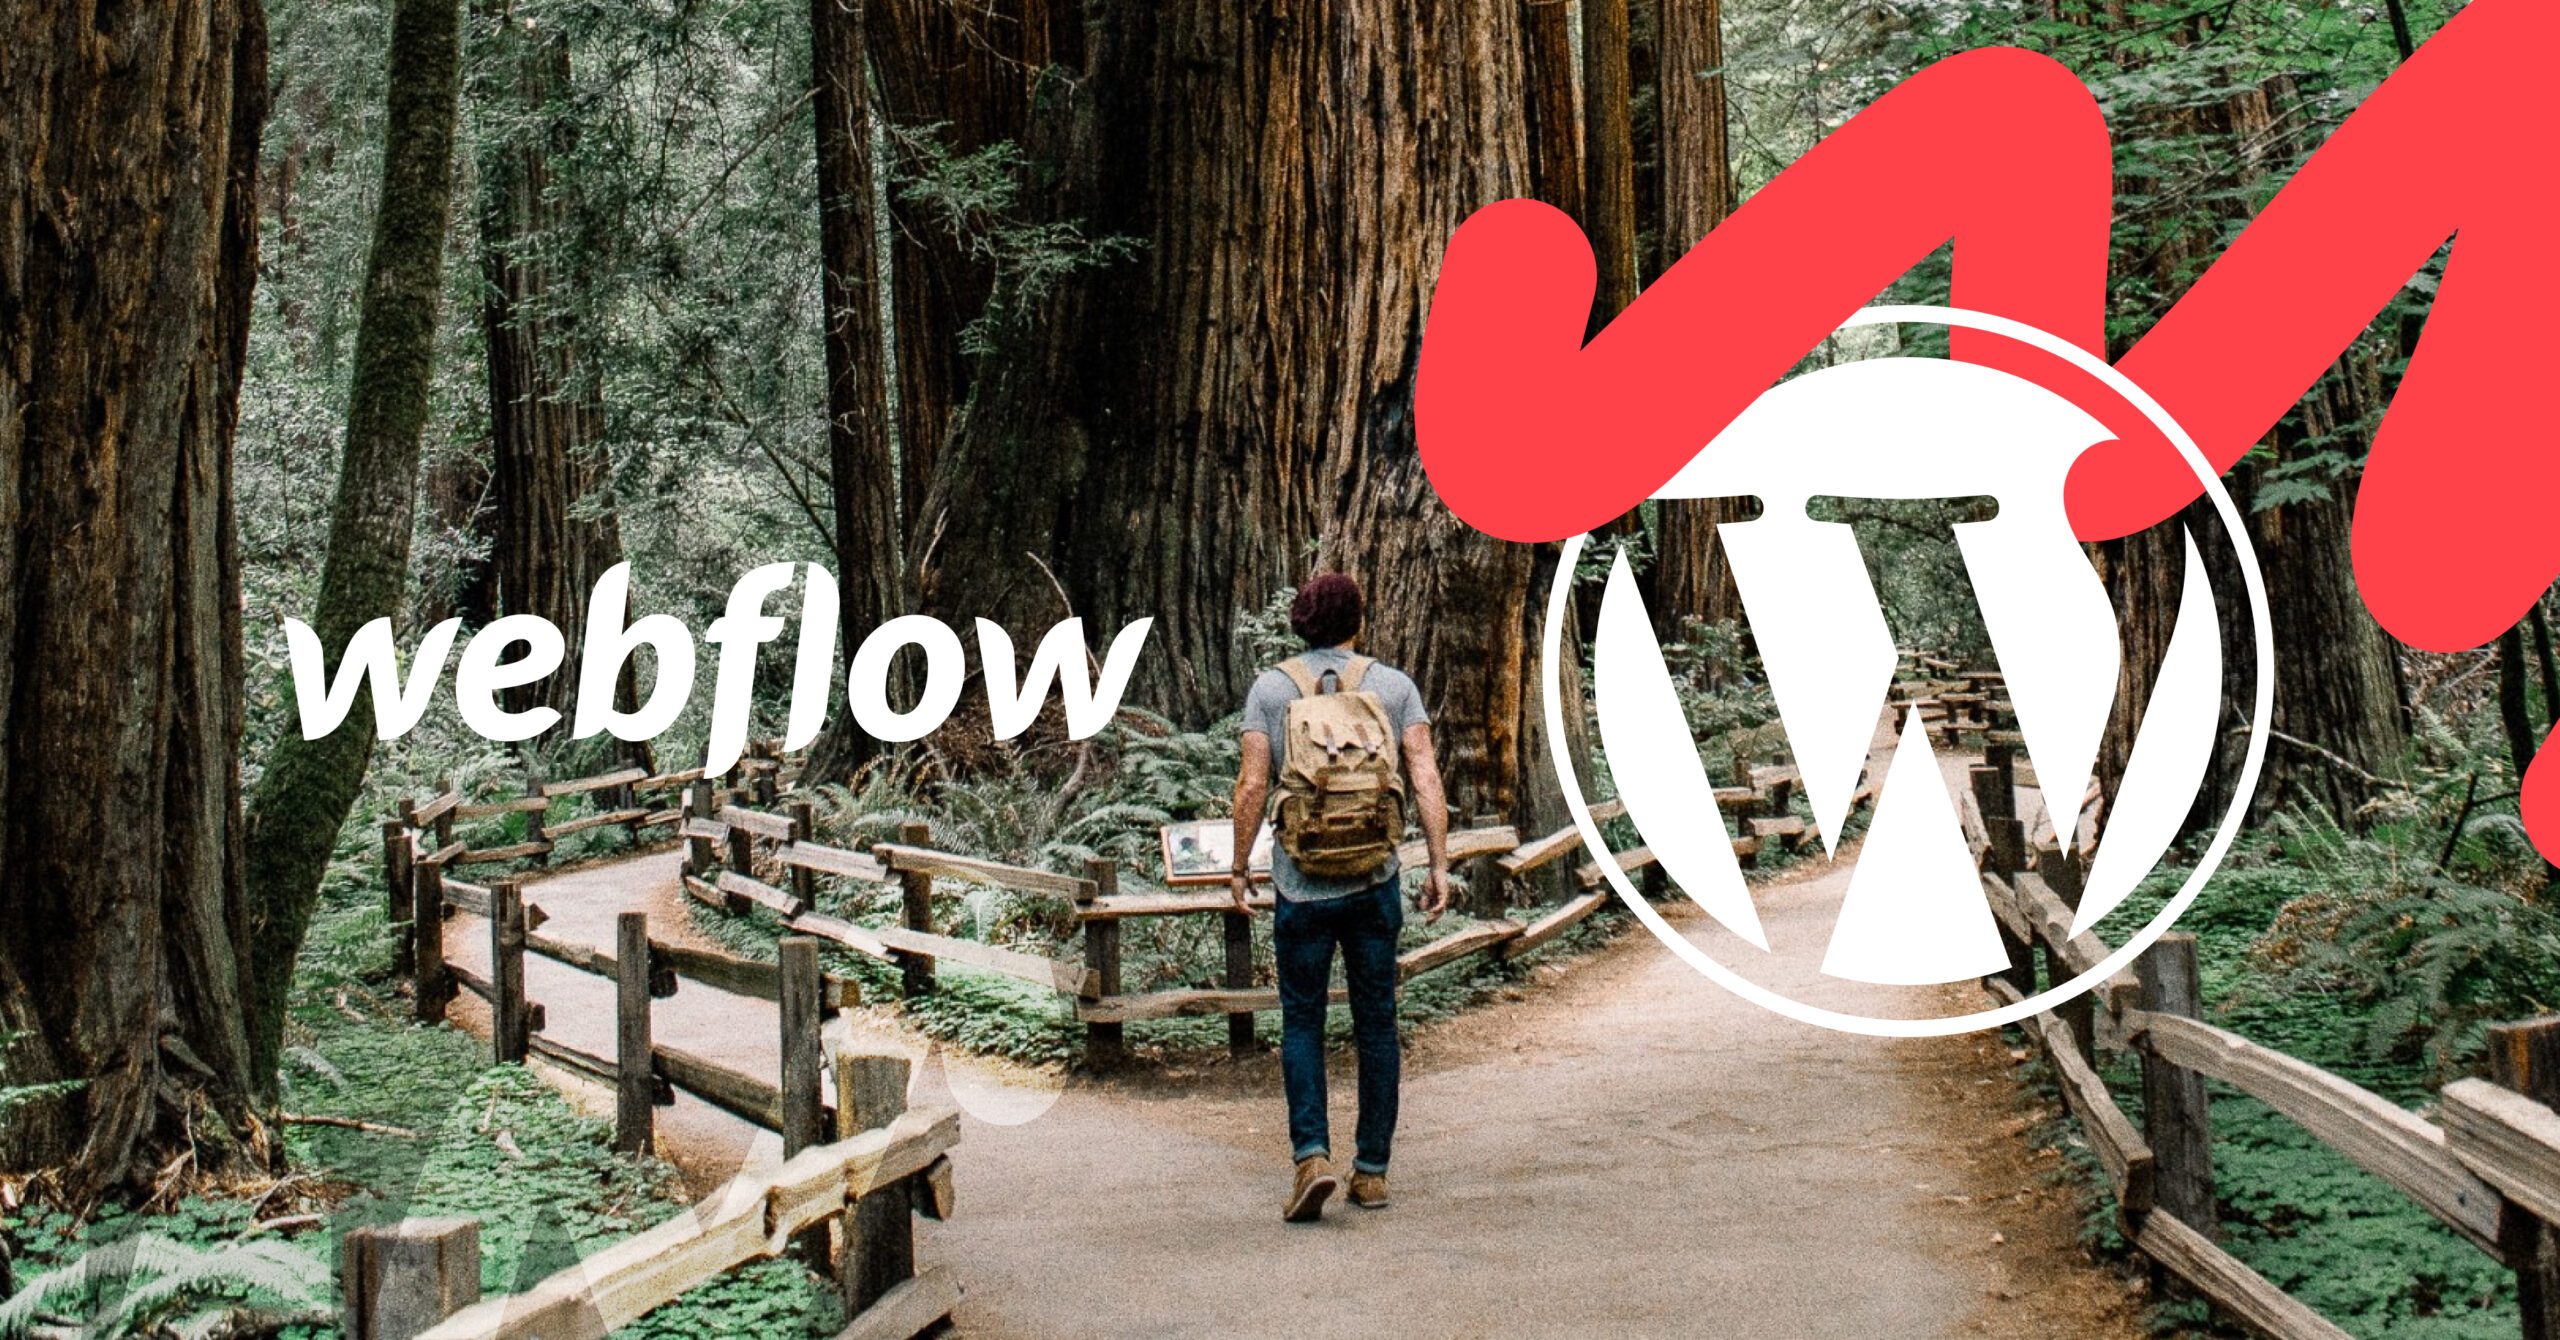 A man at a crossroads in a forest overlaid with Webflow and WordPress logos - he is deciding which path to take